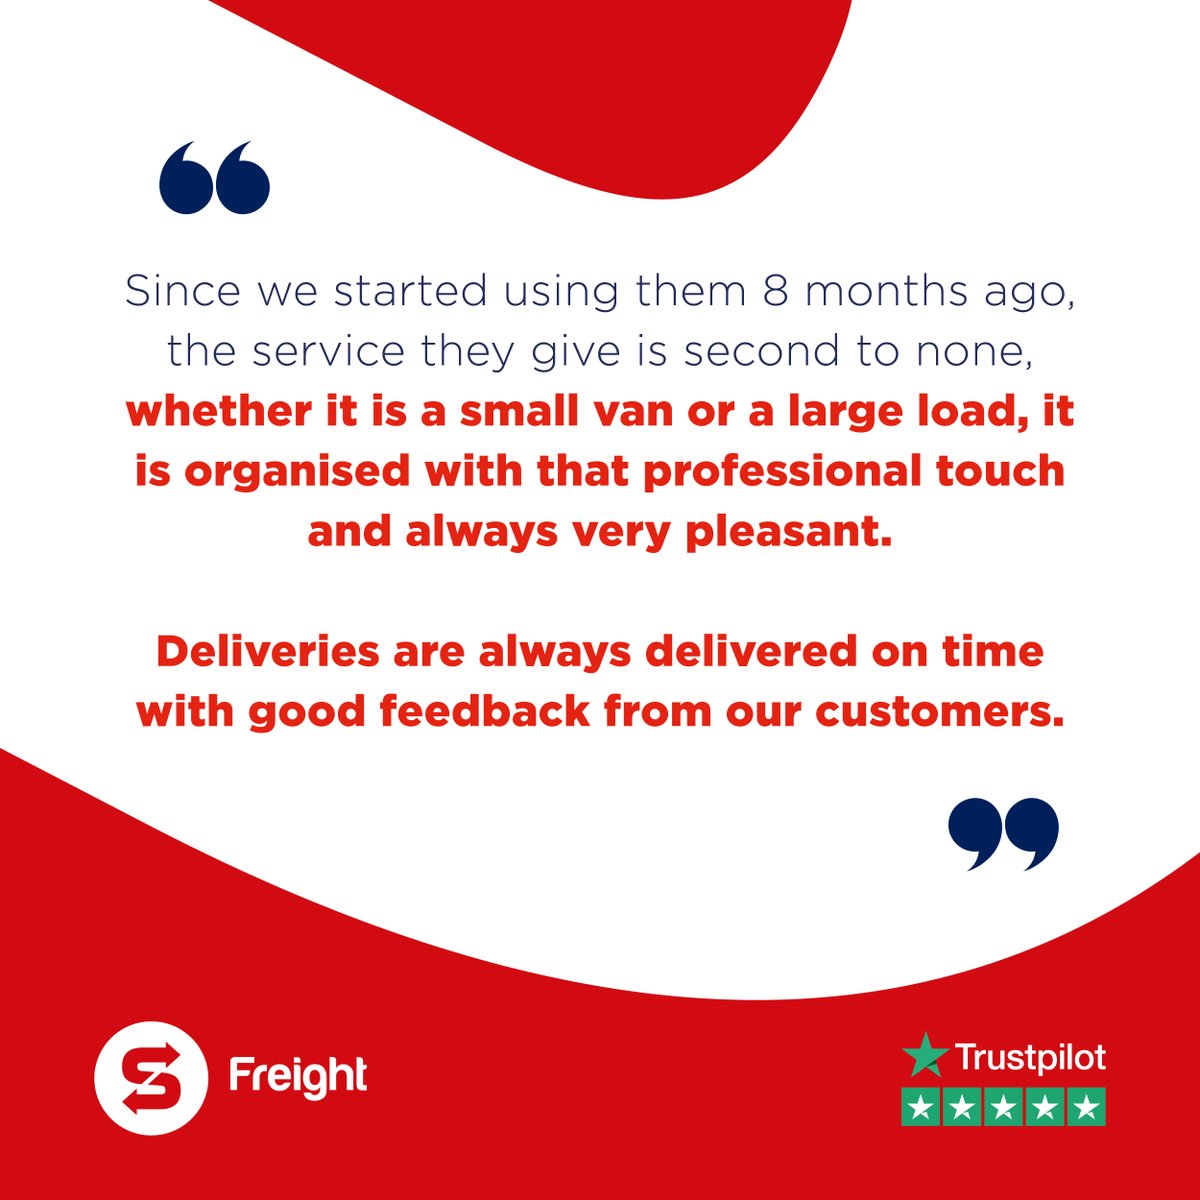 Our team is committed to ensuring that every delivery you book with us exceeds your expectations. From the moment you reach out to us, our friendly staff are ready to assist. ➡️ Book in a consultation with your local Speedy team: hubs.la/Q02wMVgm0